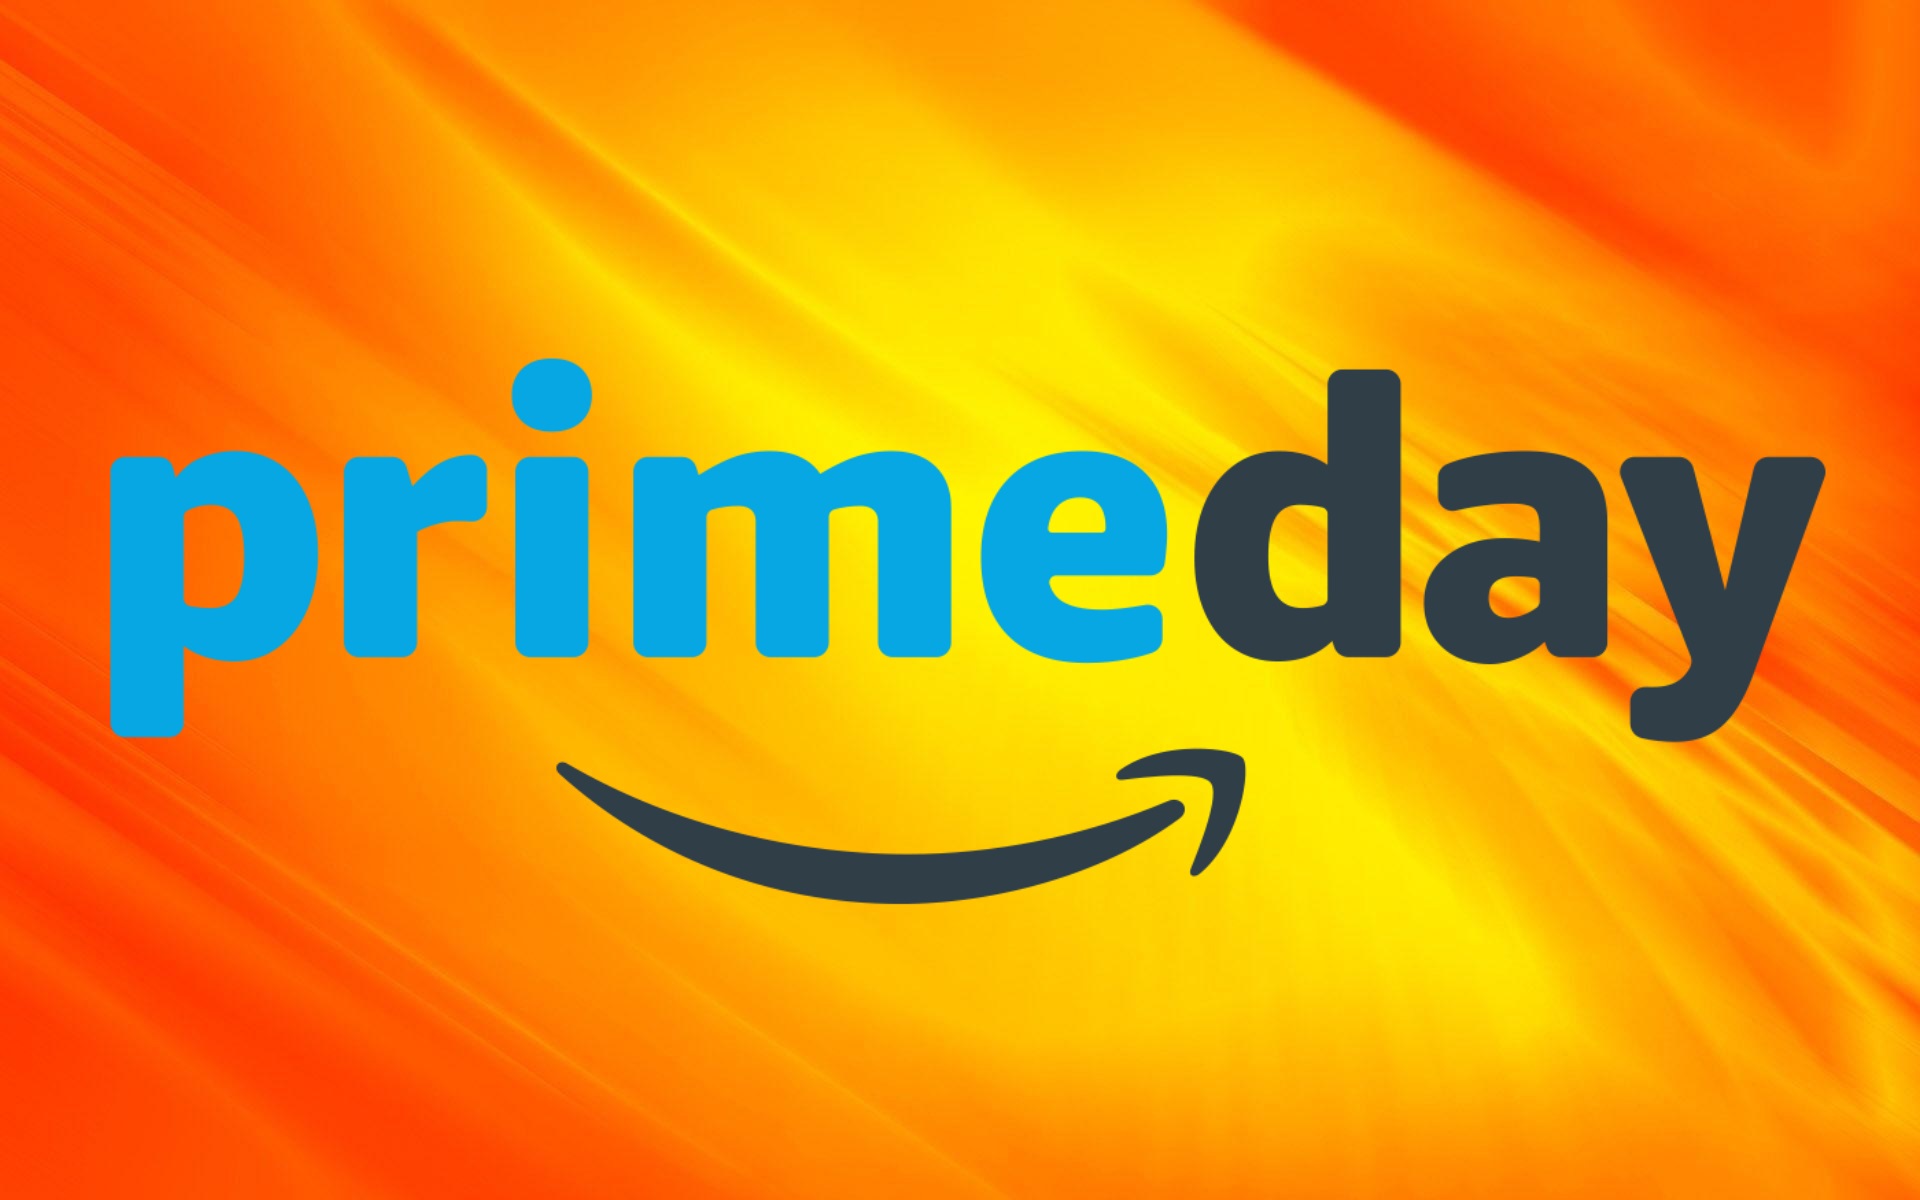 Amazon Prime Day 2020 In The Uk Will The Date Be August This Year Images, Photos, Reviews